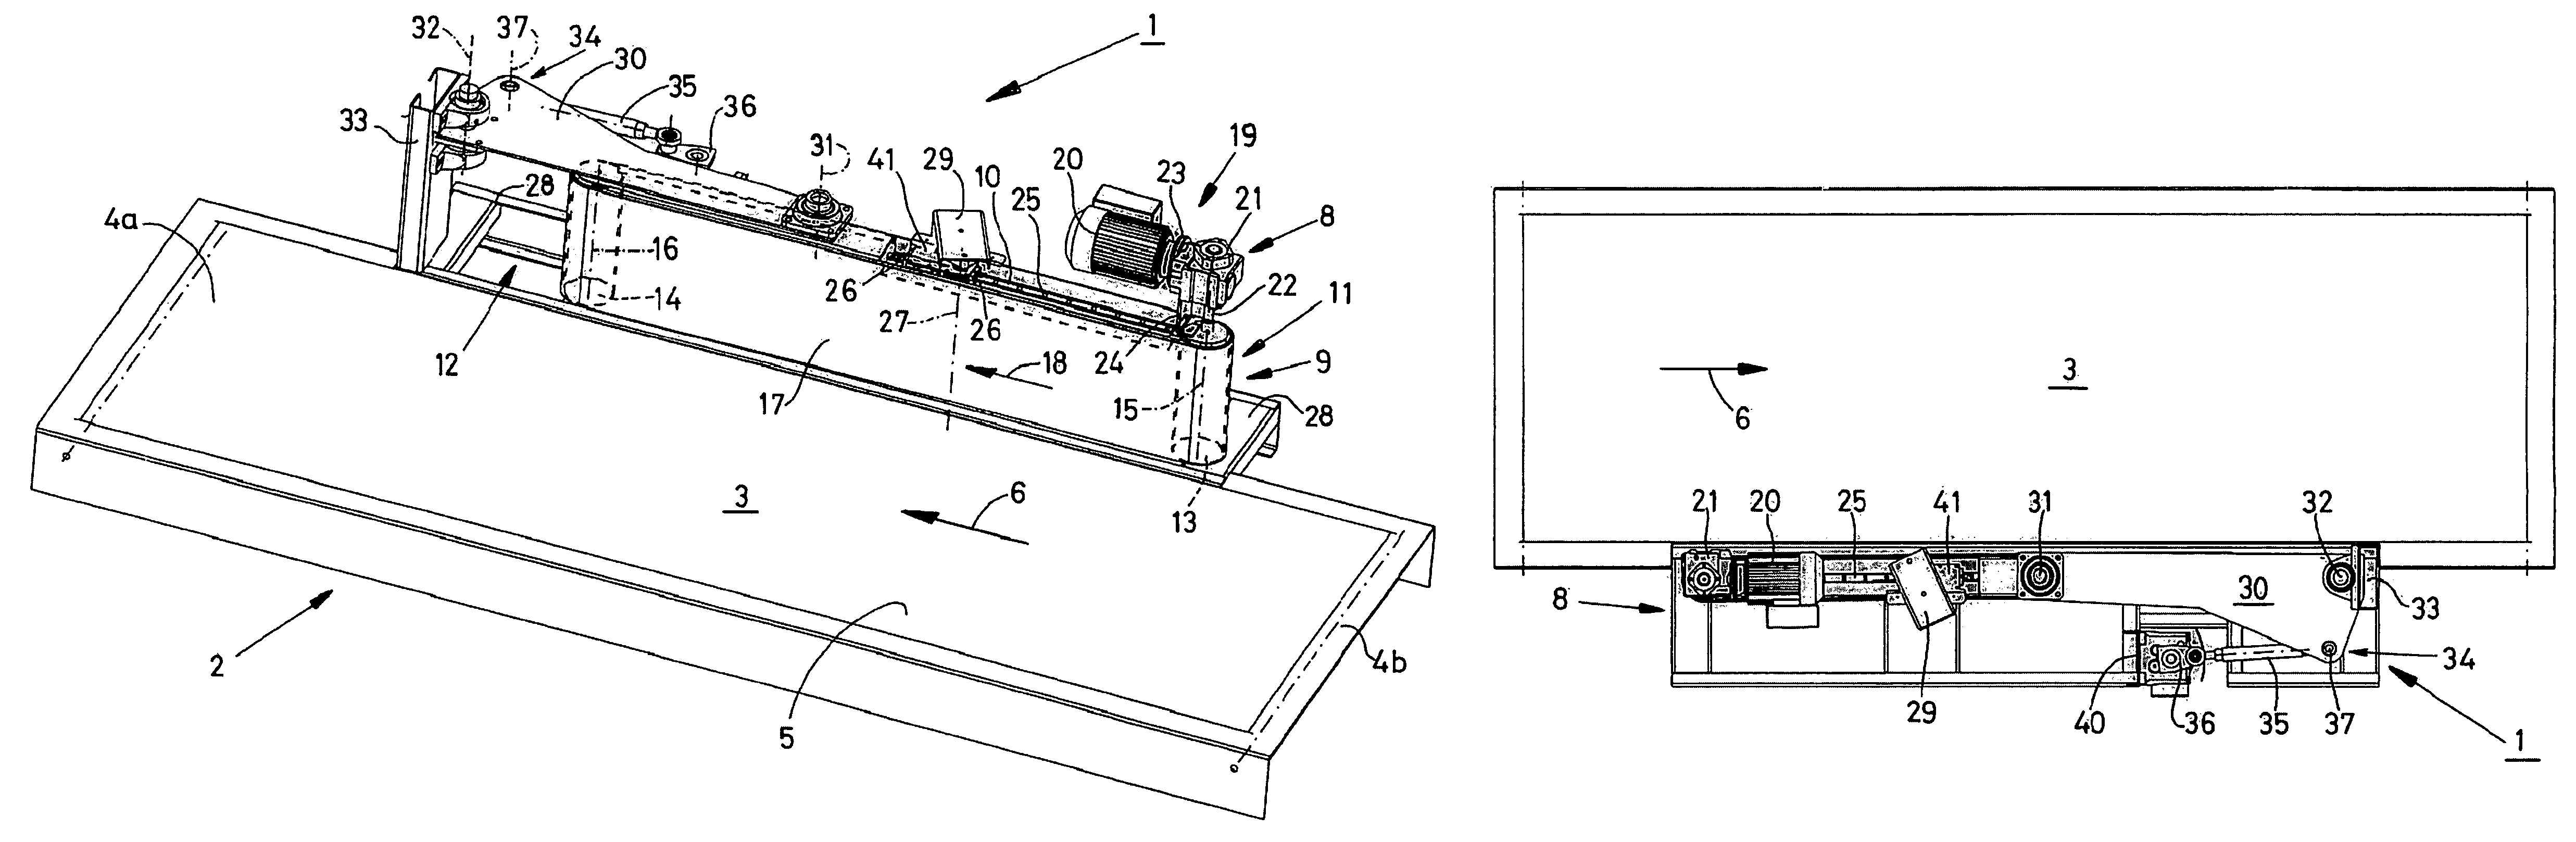 Device for diverting products sideways from a conveyor